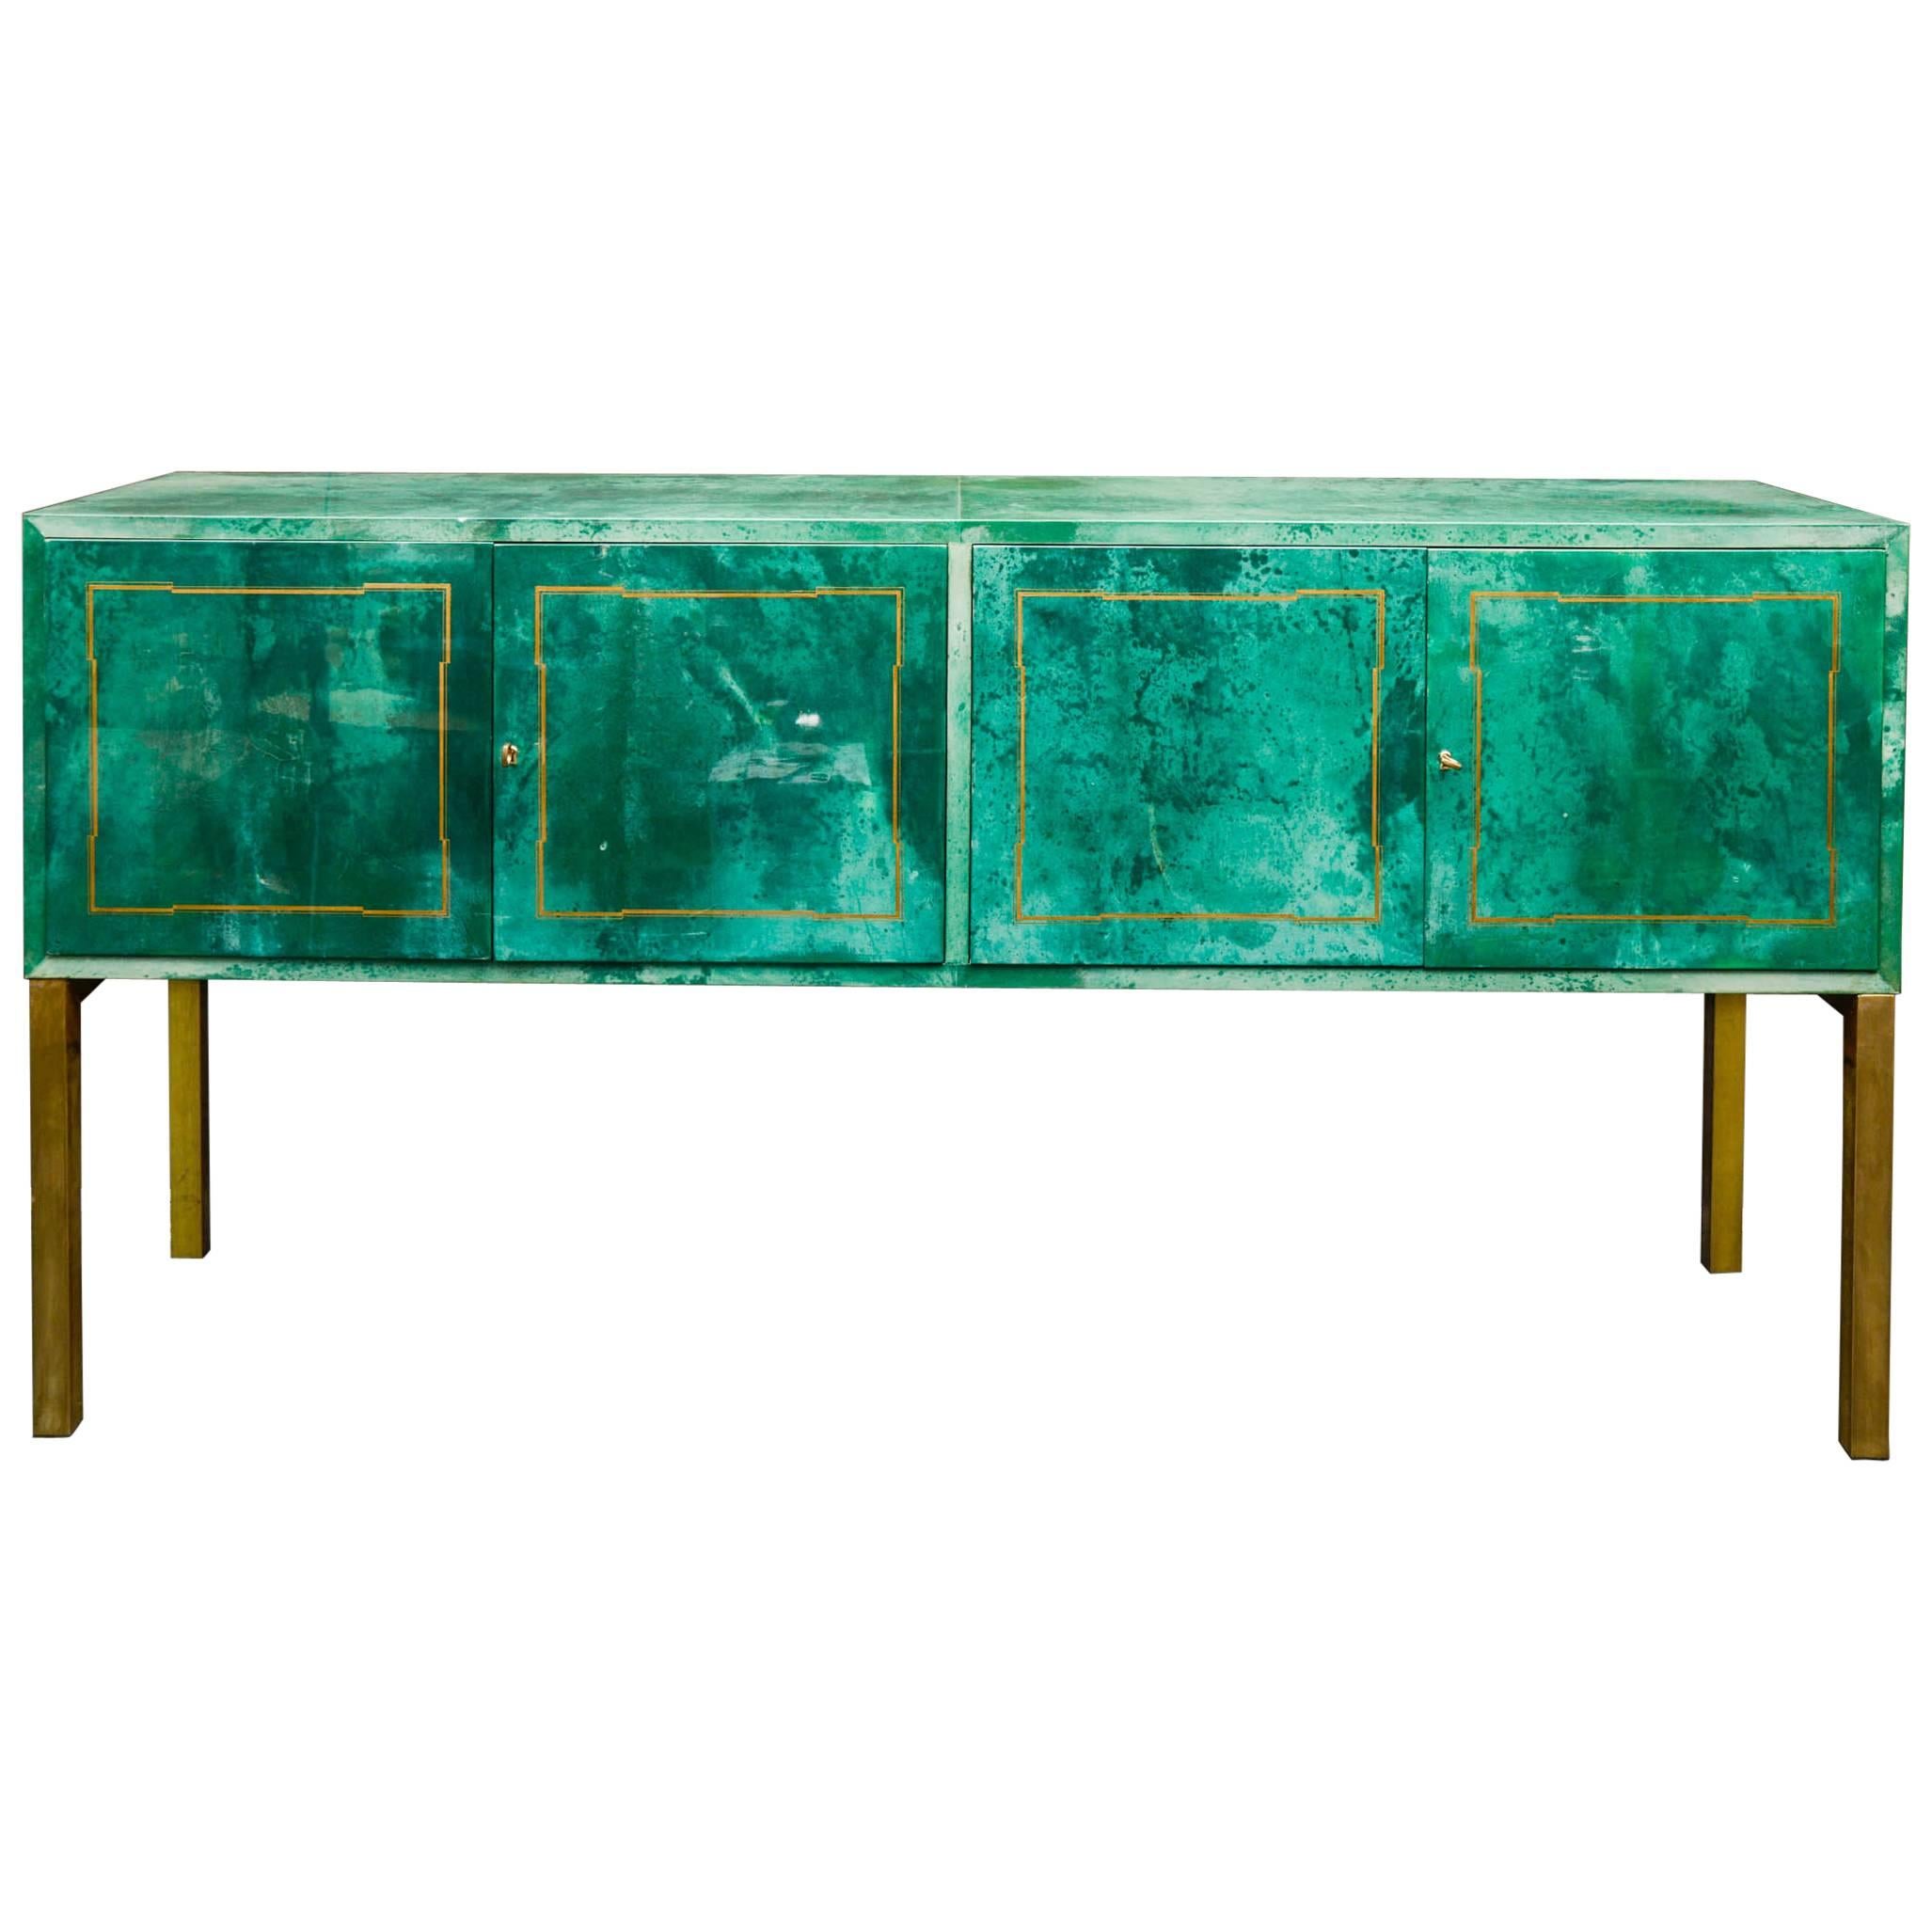 Rare Green Parchment Sideboard by Aldo Tura